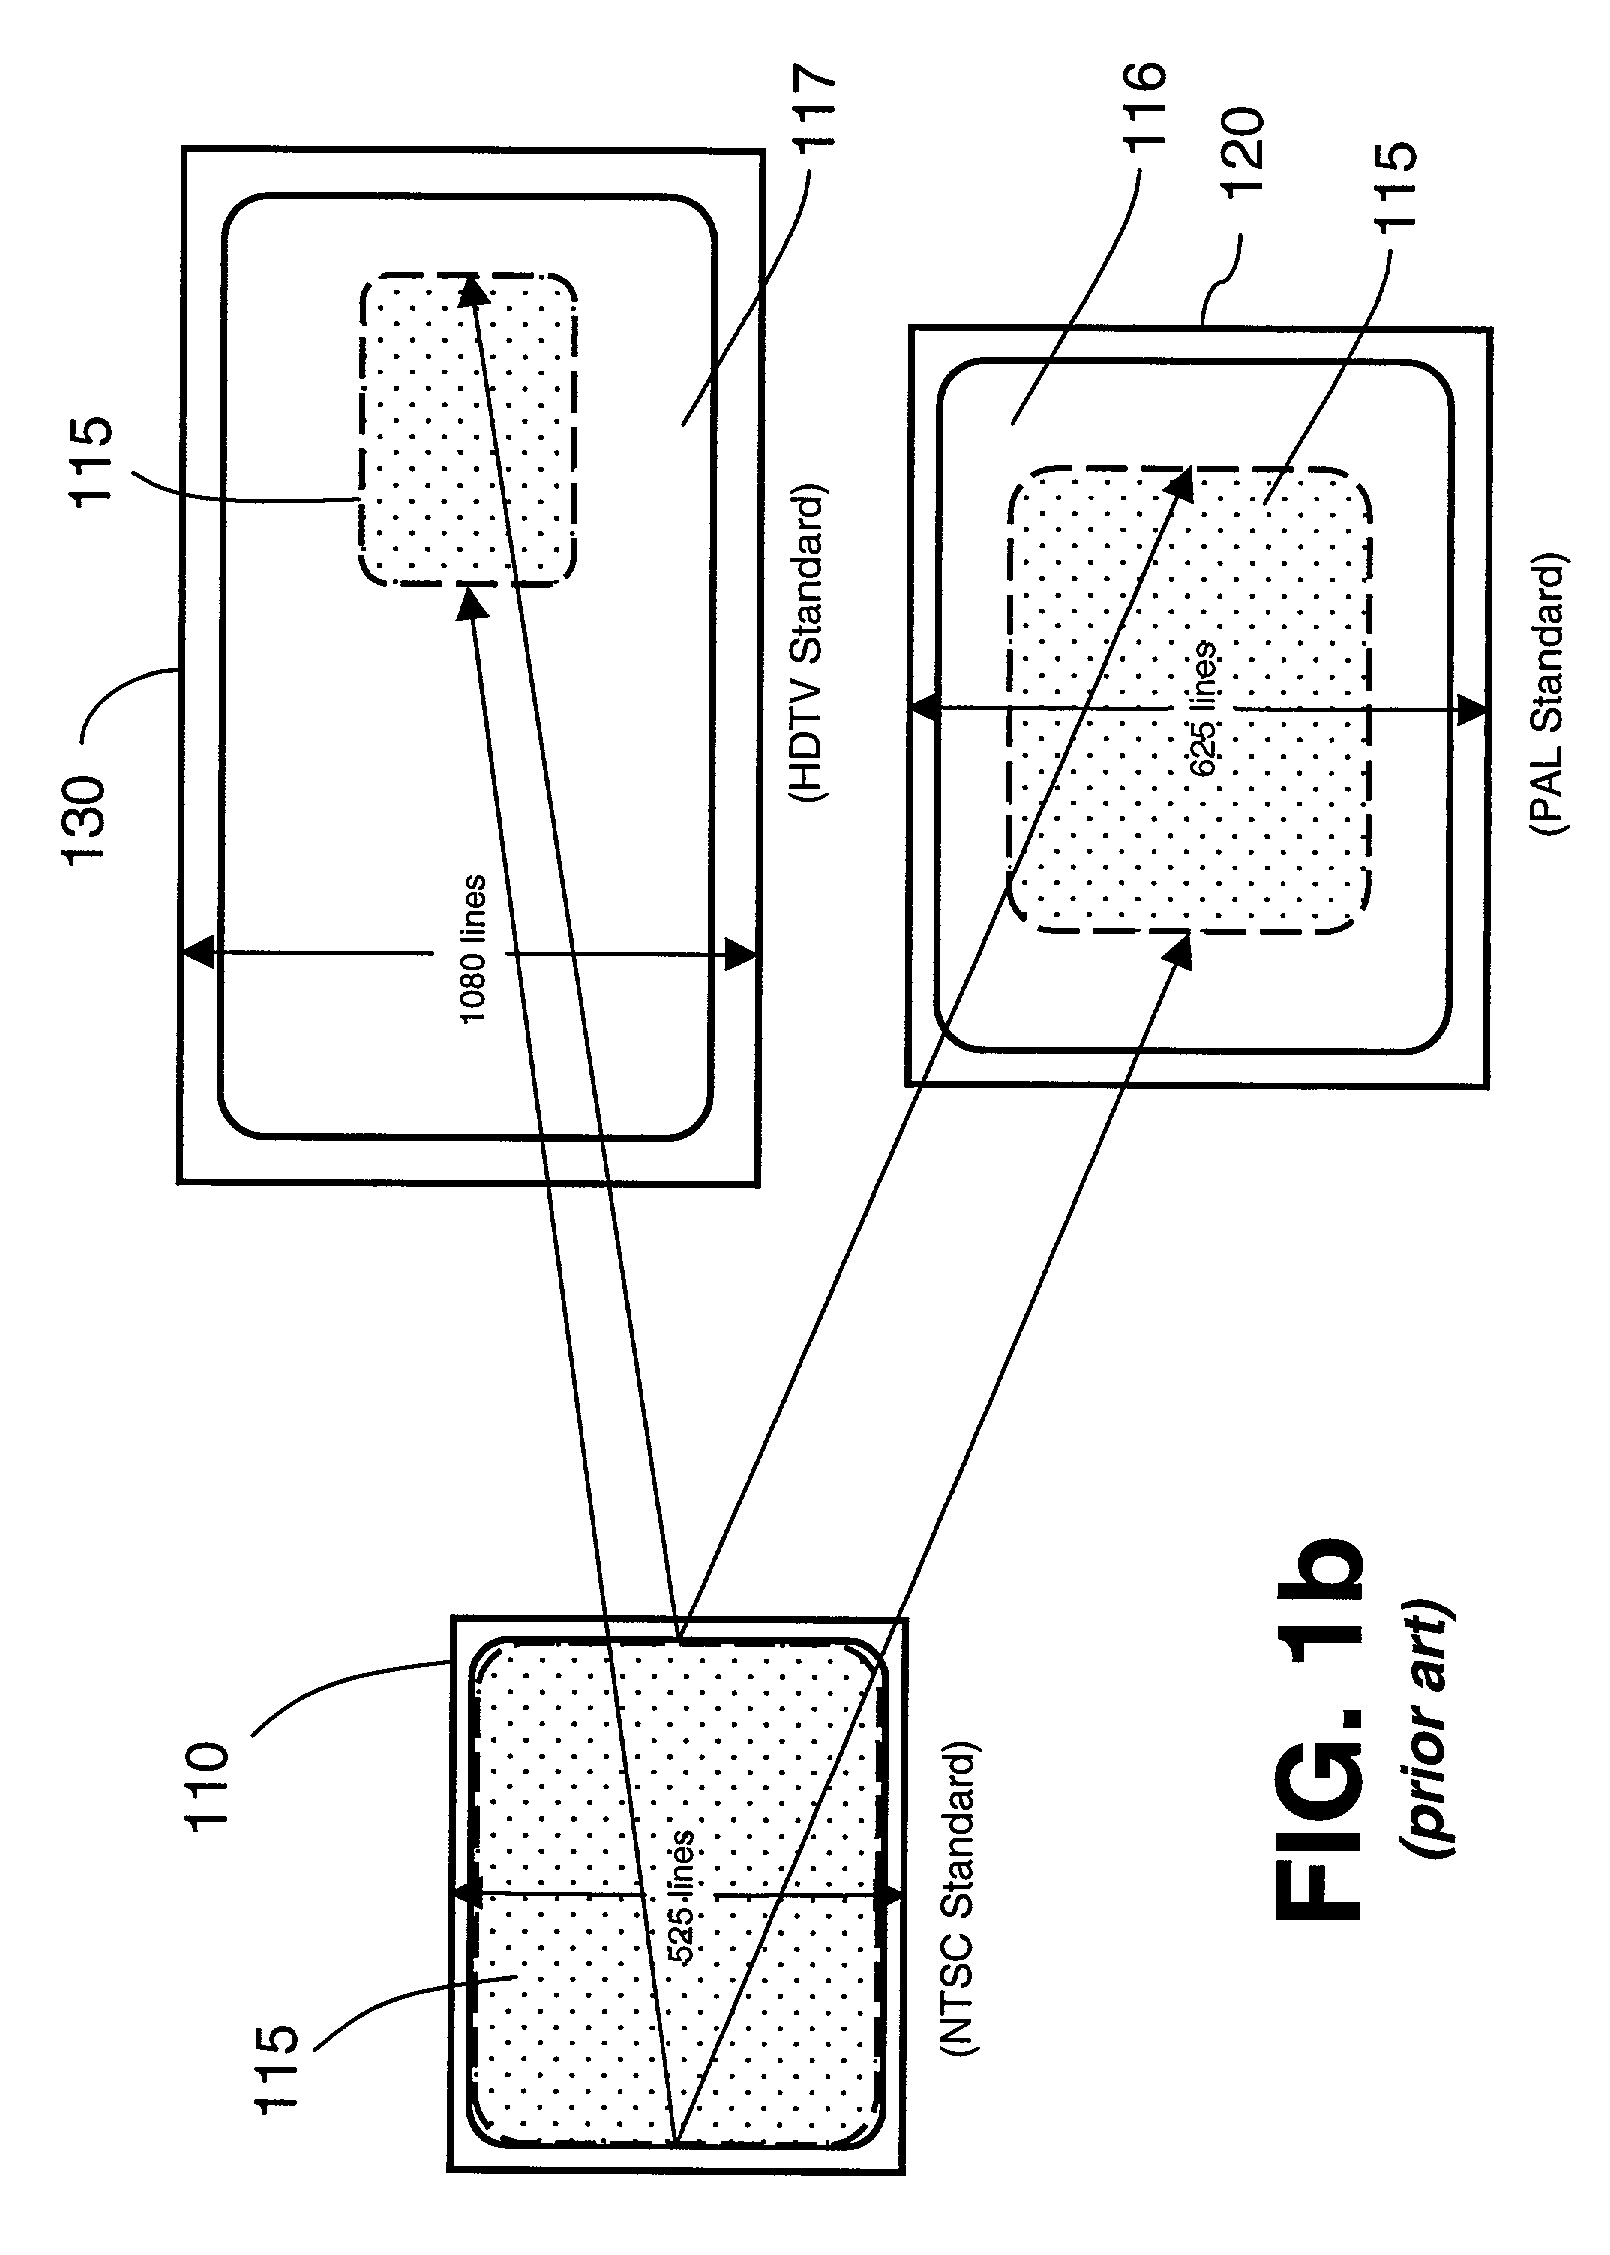 System and method for rendering graphics and video on a display